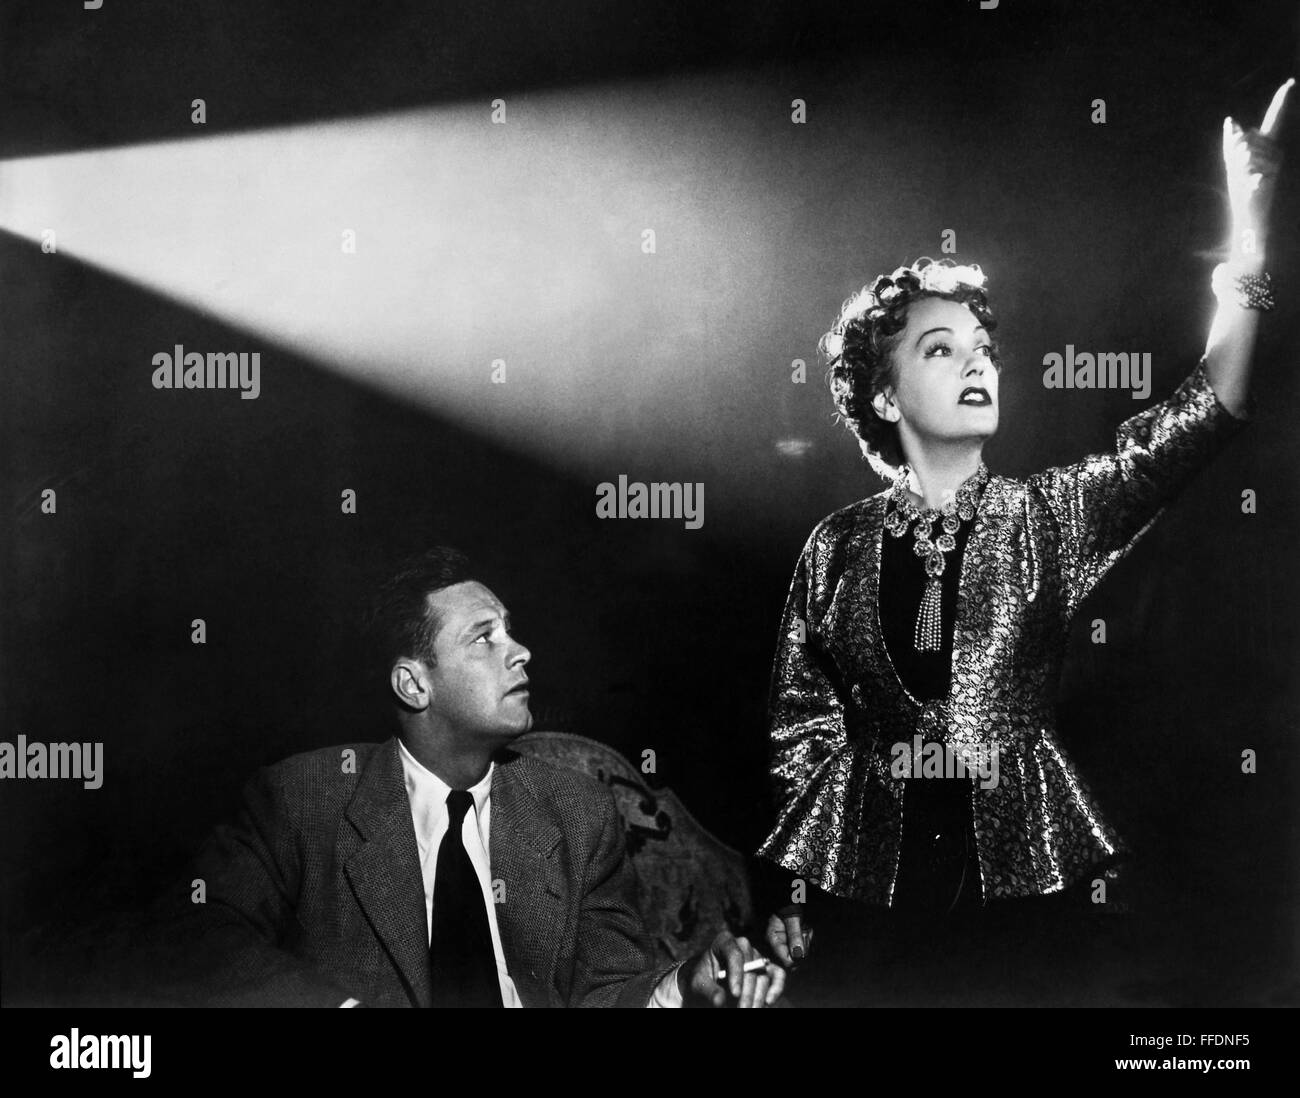 SUNSET BOULEVARD, 1950. /nGloria Swanson and William Holden in a scene from the film, 'Sunset Boulevard,' directed by Billy Wilder, 1950. Stock Photo